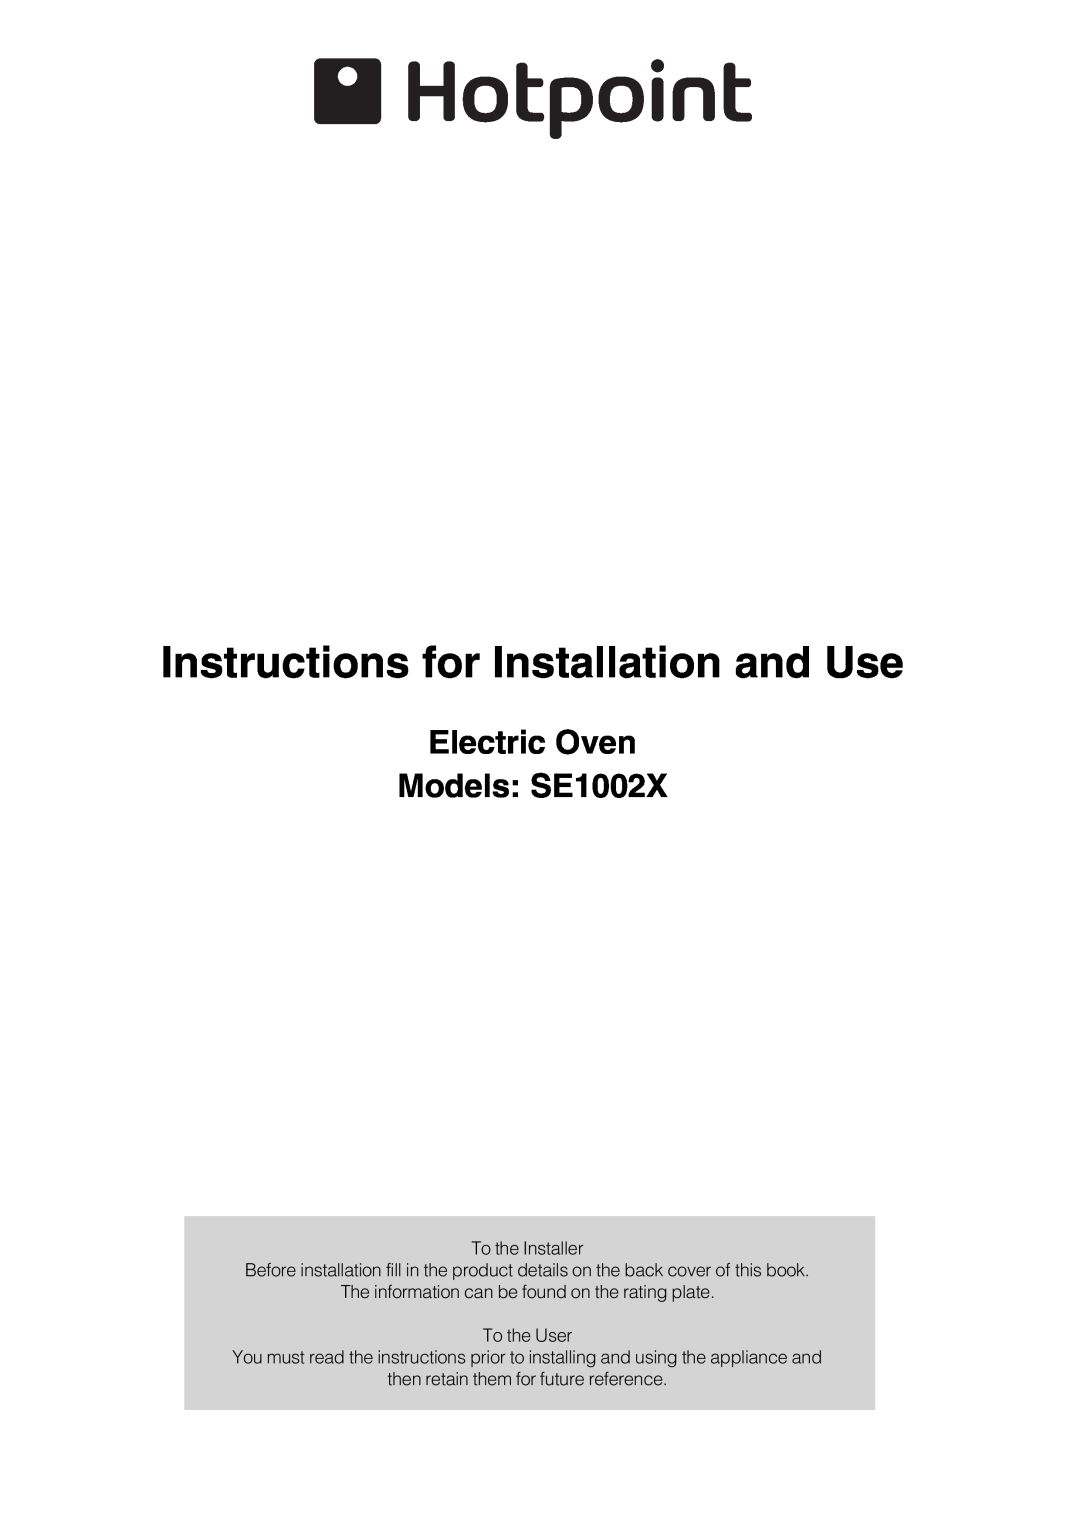 Hotpoint manual Instructions for Installation and Use, Electric Oven Models SE1002X 